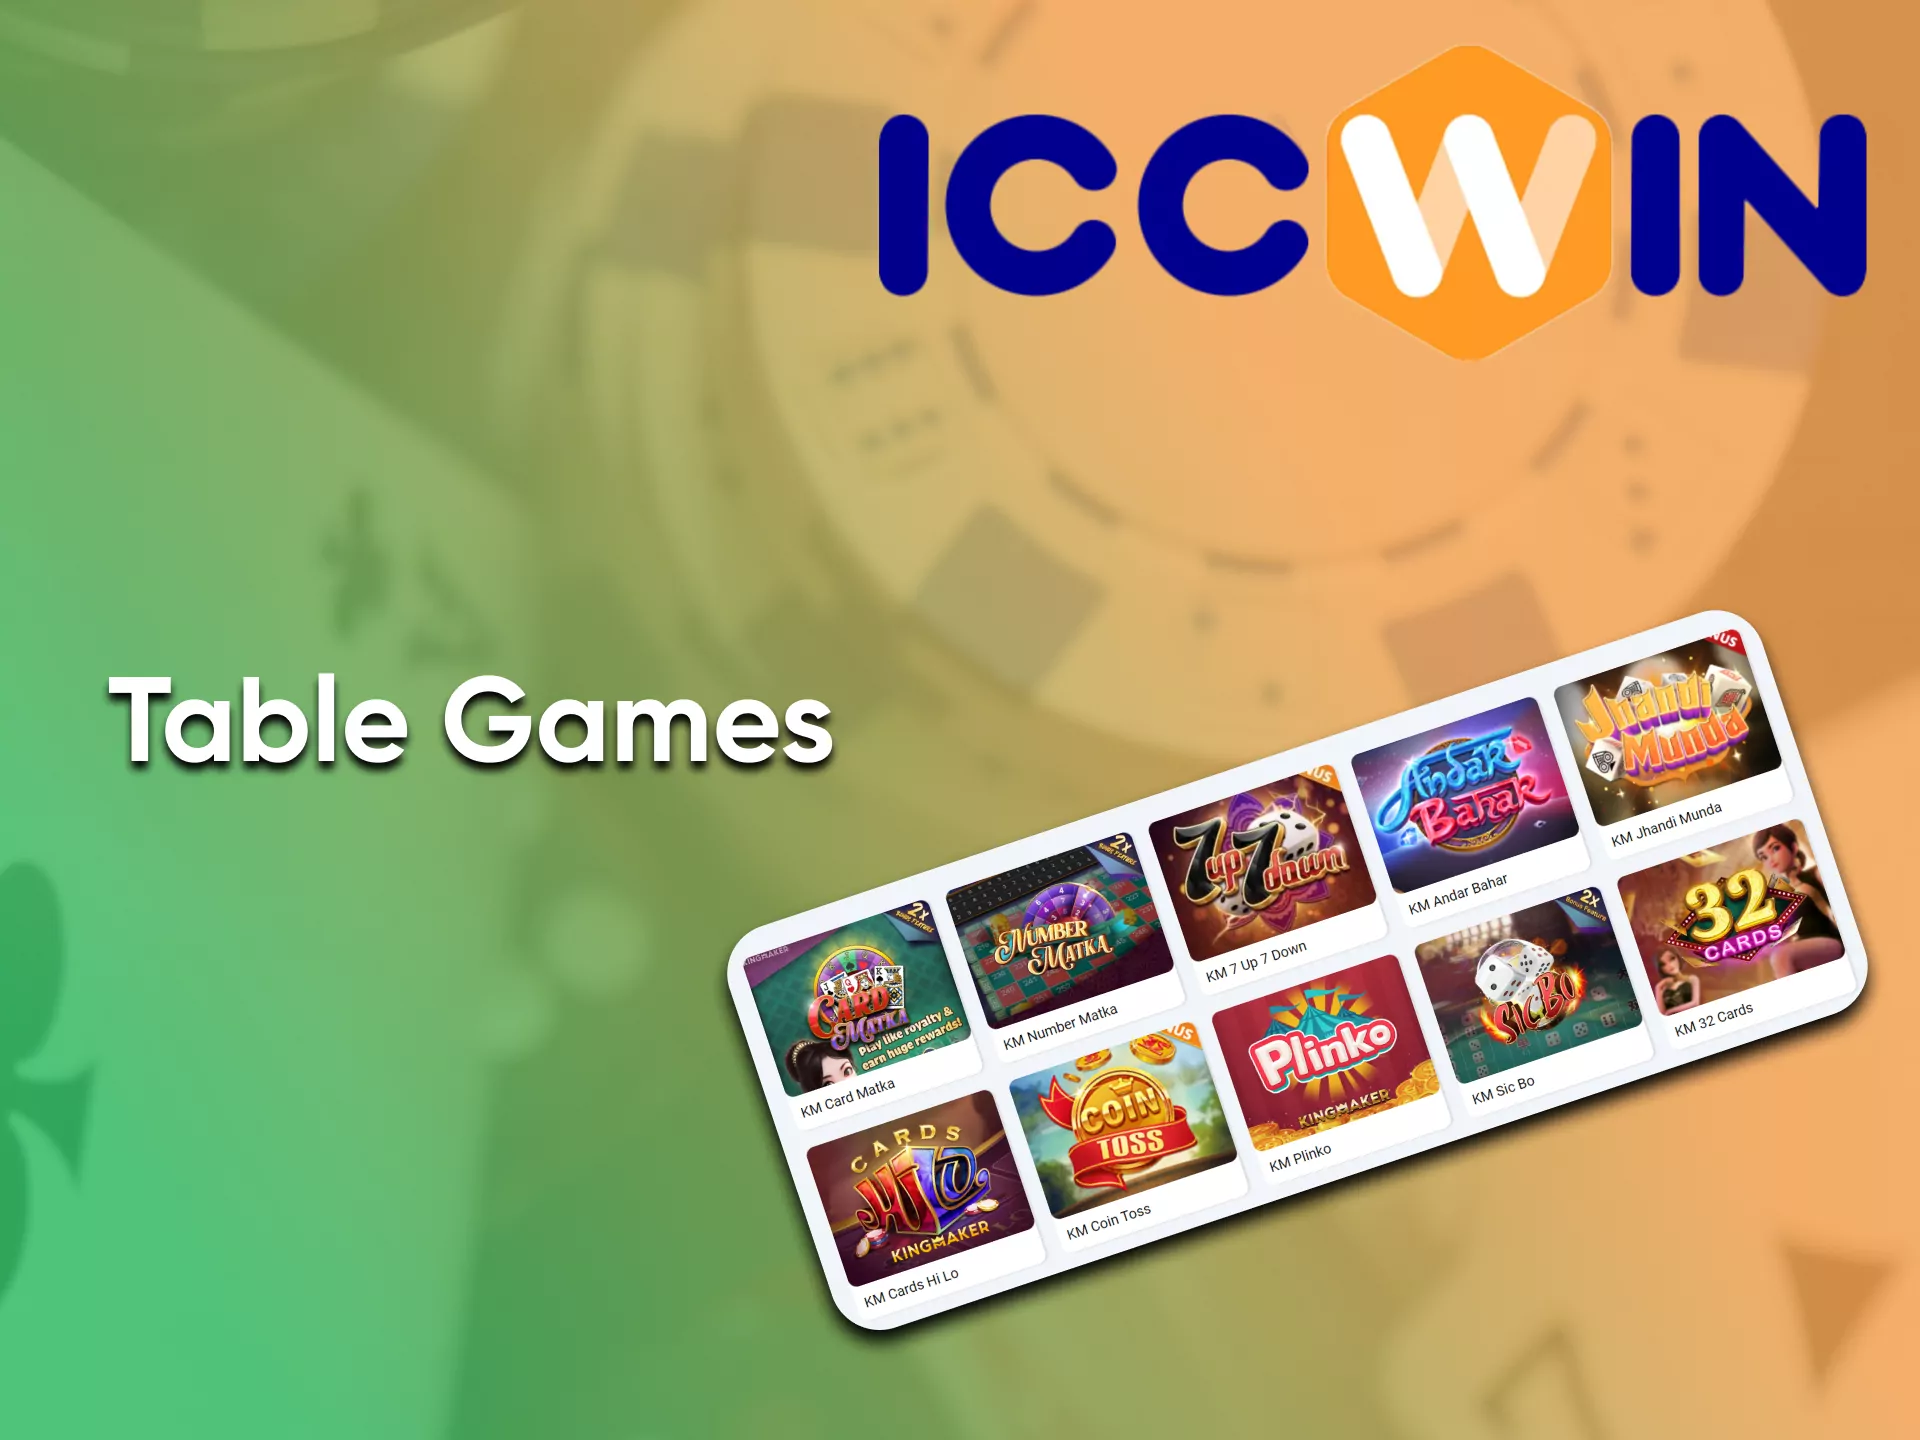 Play Table Games in the section from ICCWin.